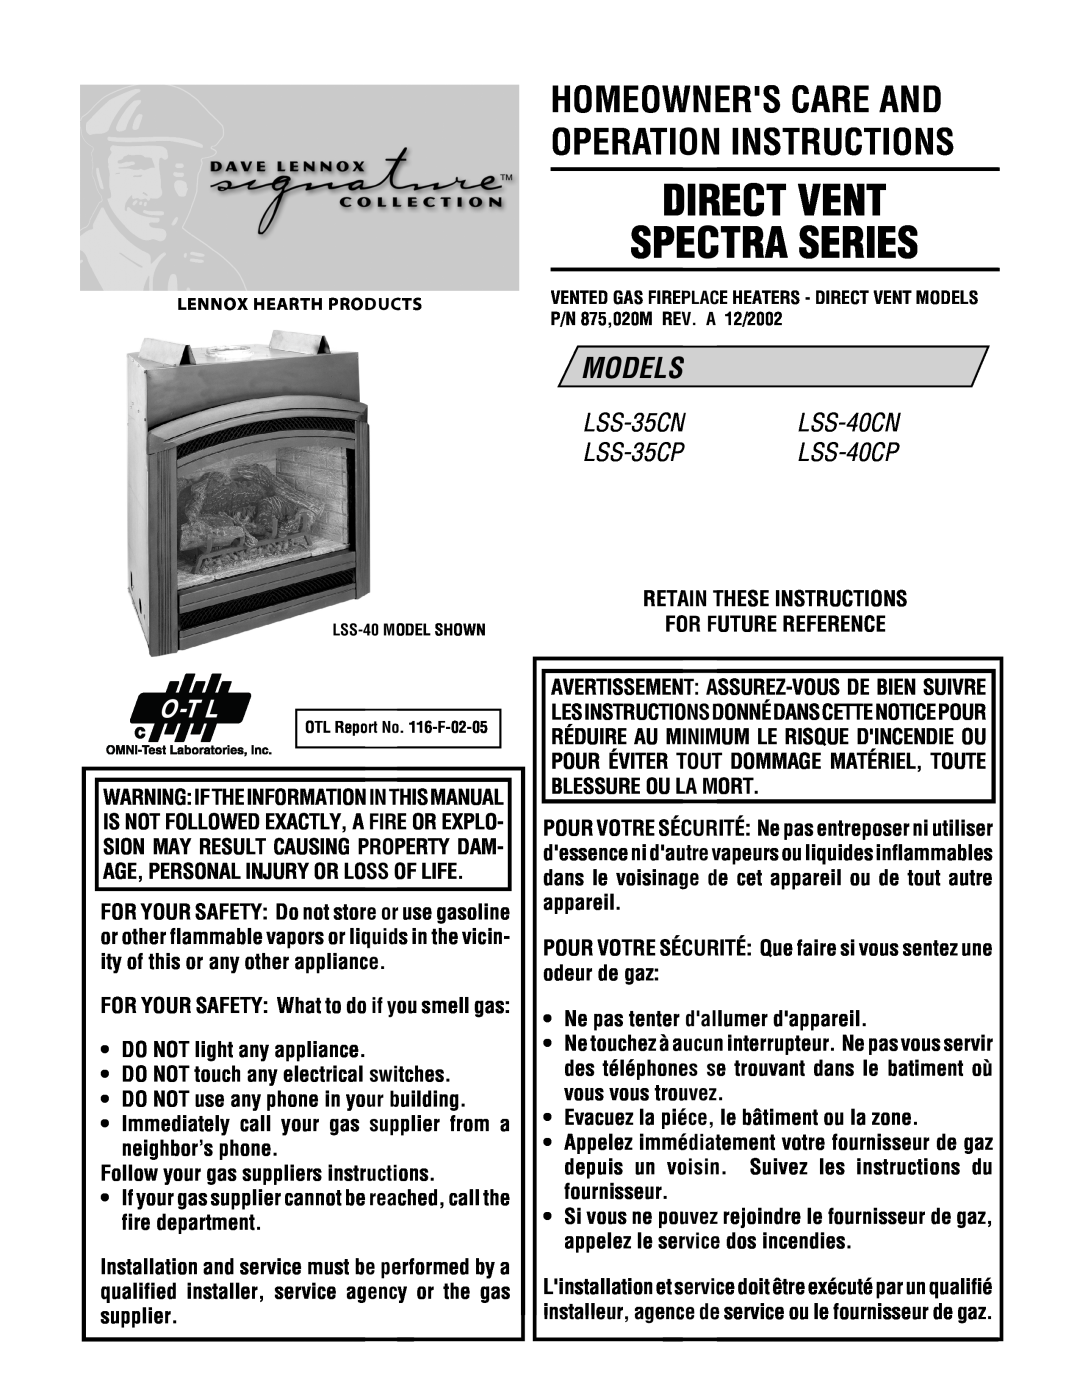 Magnavox LSS-40CP manual Homeowners Care And Operation Instructions, Direct Vent, Spectra Series, Models 